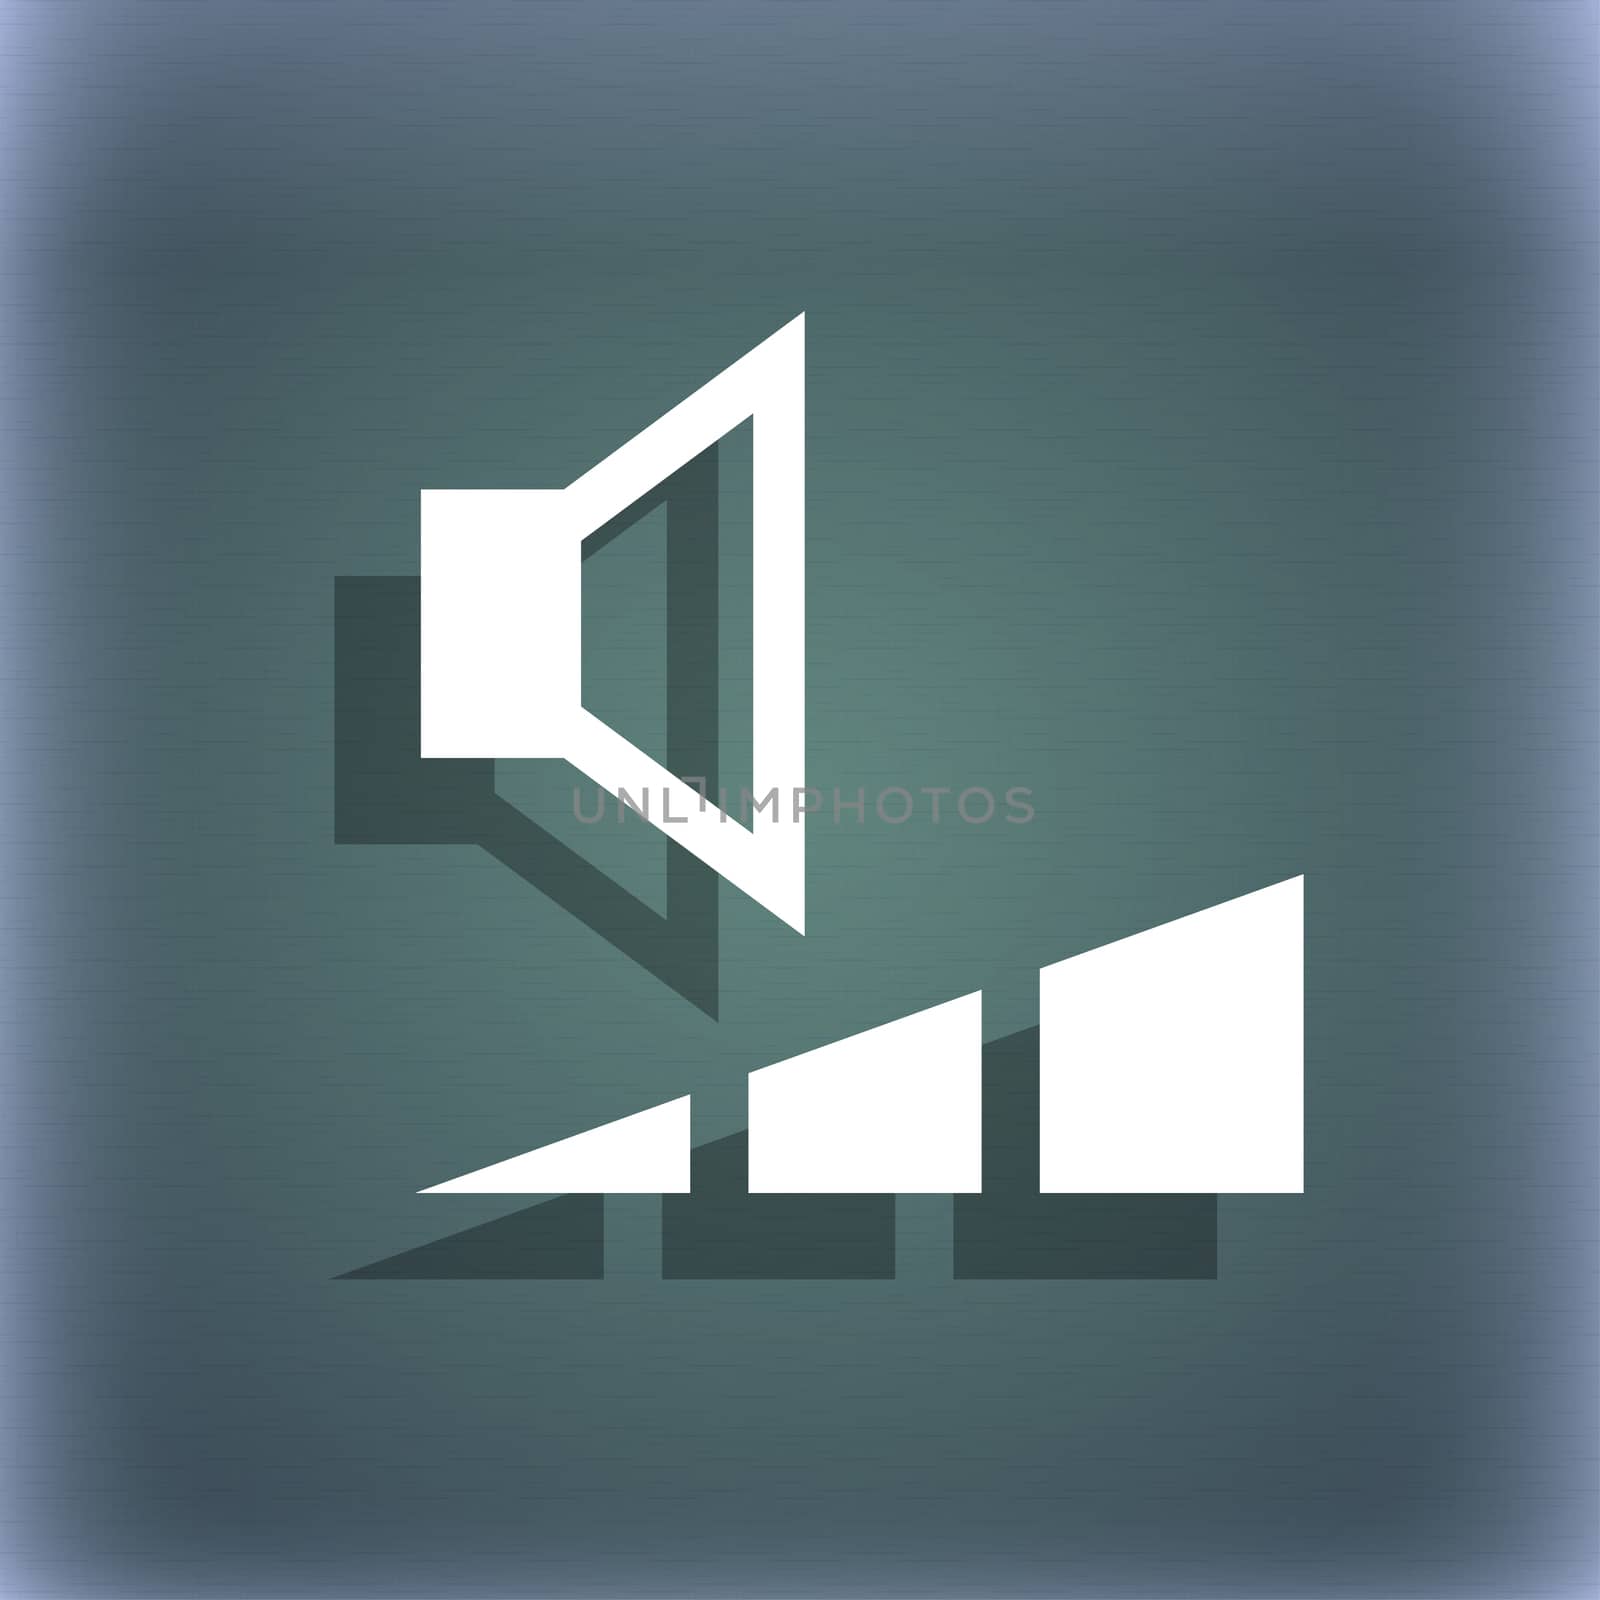 volume, sound icon symbol on the blue-green abstract background with shadow and space for your text. illustration